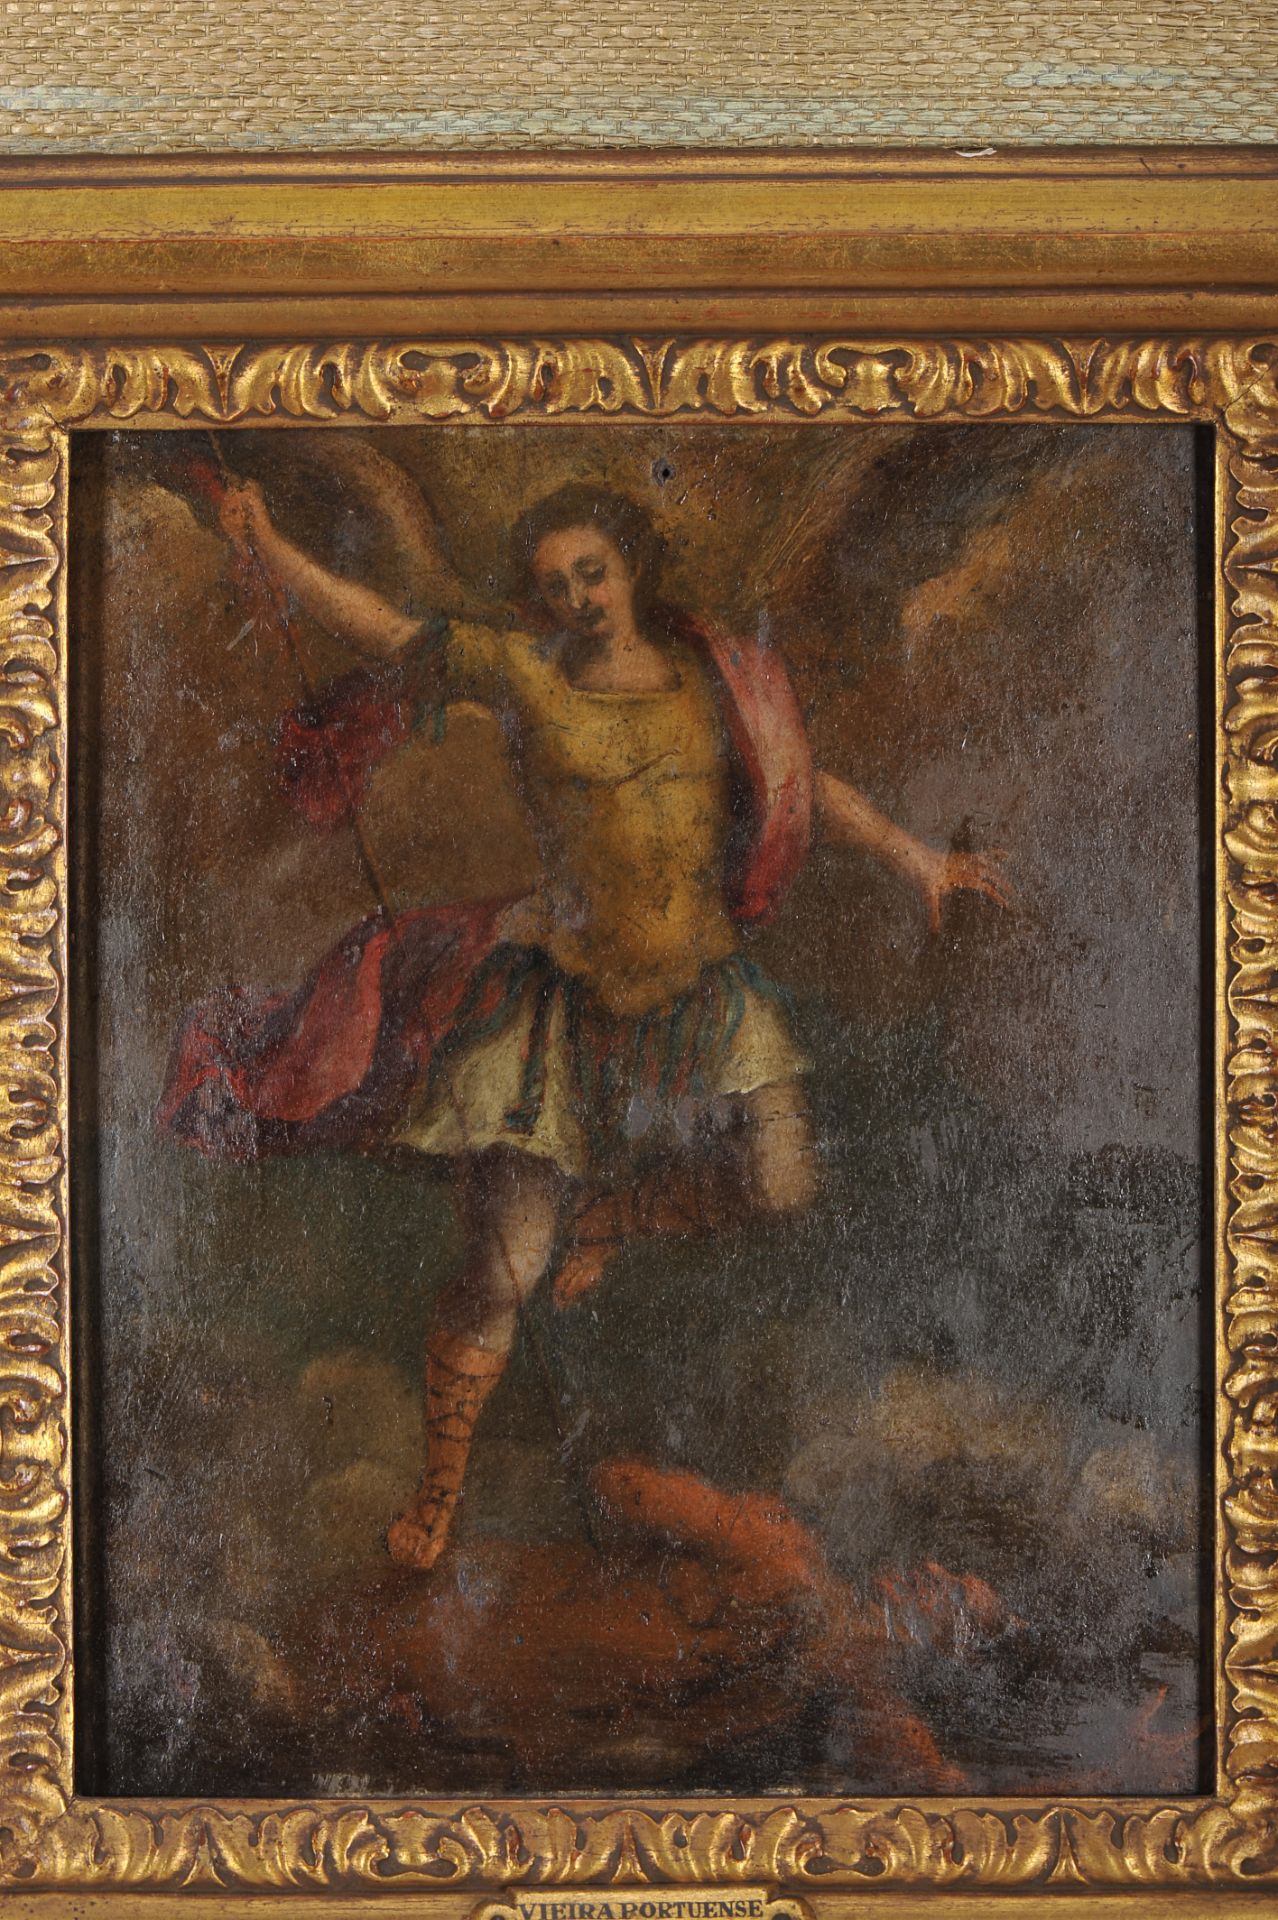 St. Michael the Archangel - Image 2 of 3